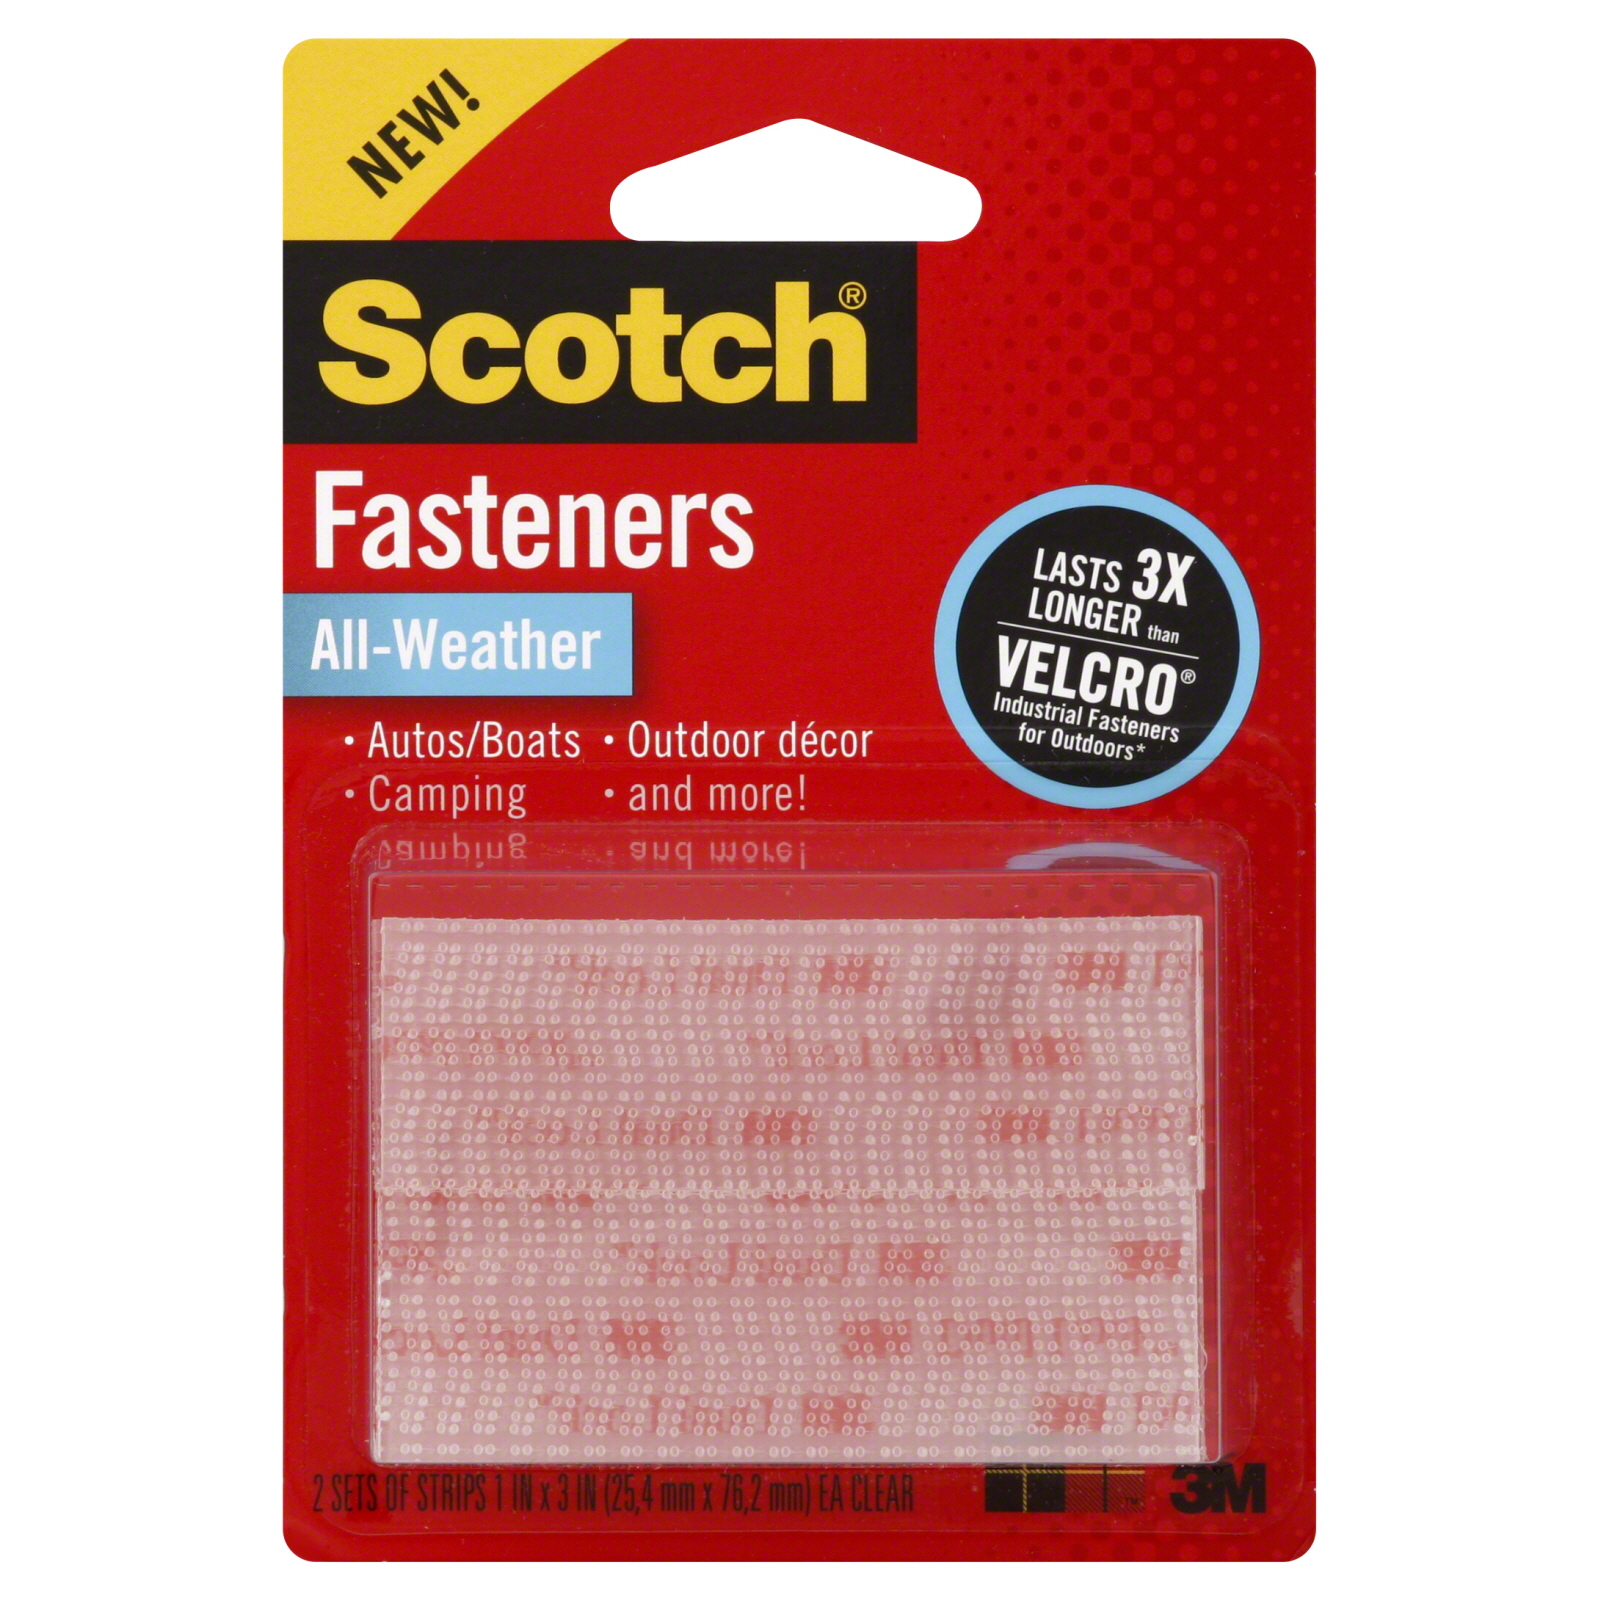 Scotch 2029733 Fasteners, All-Weather, Clear, 2 sets